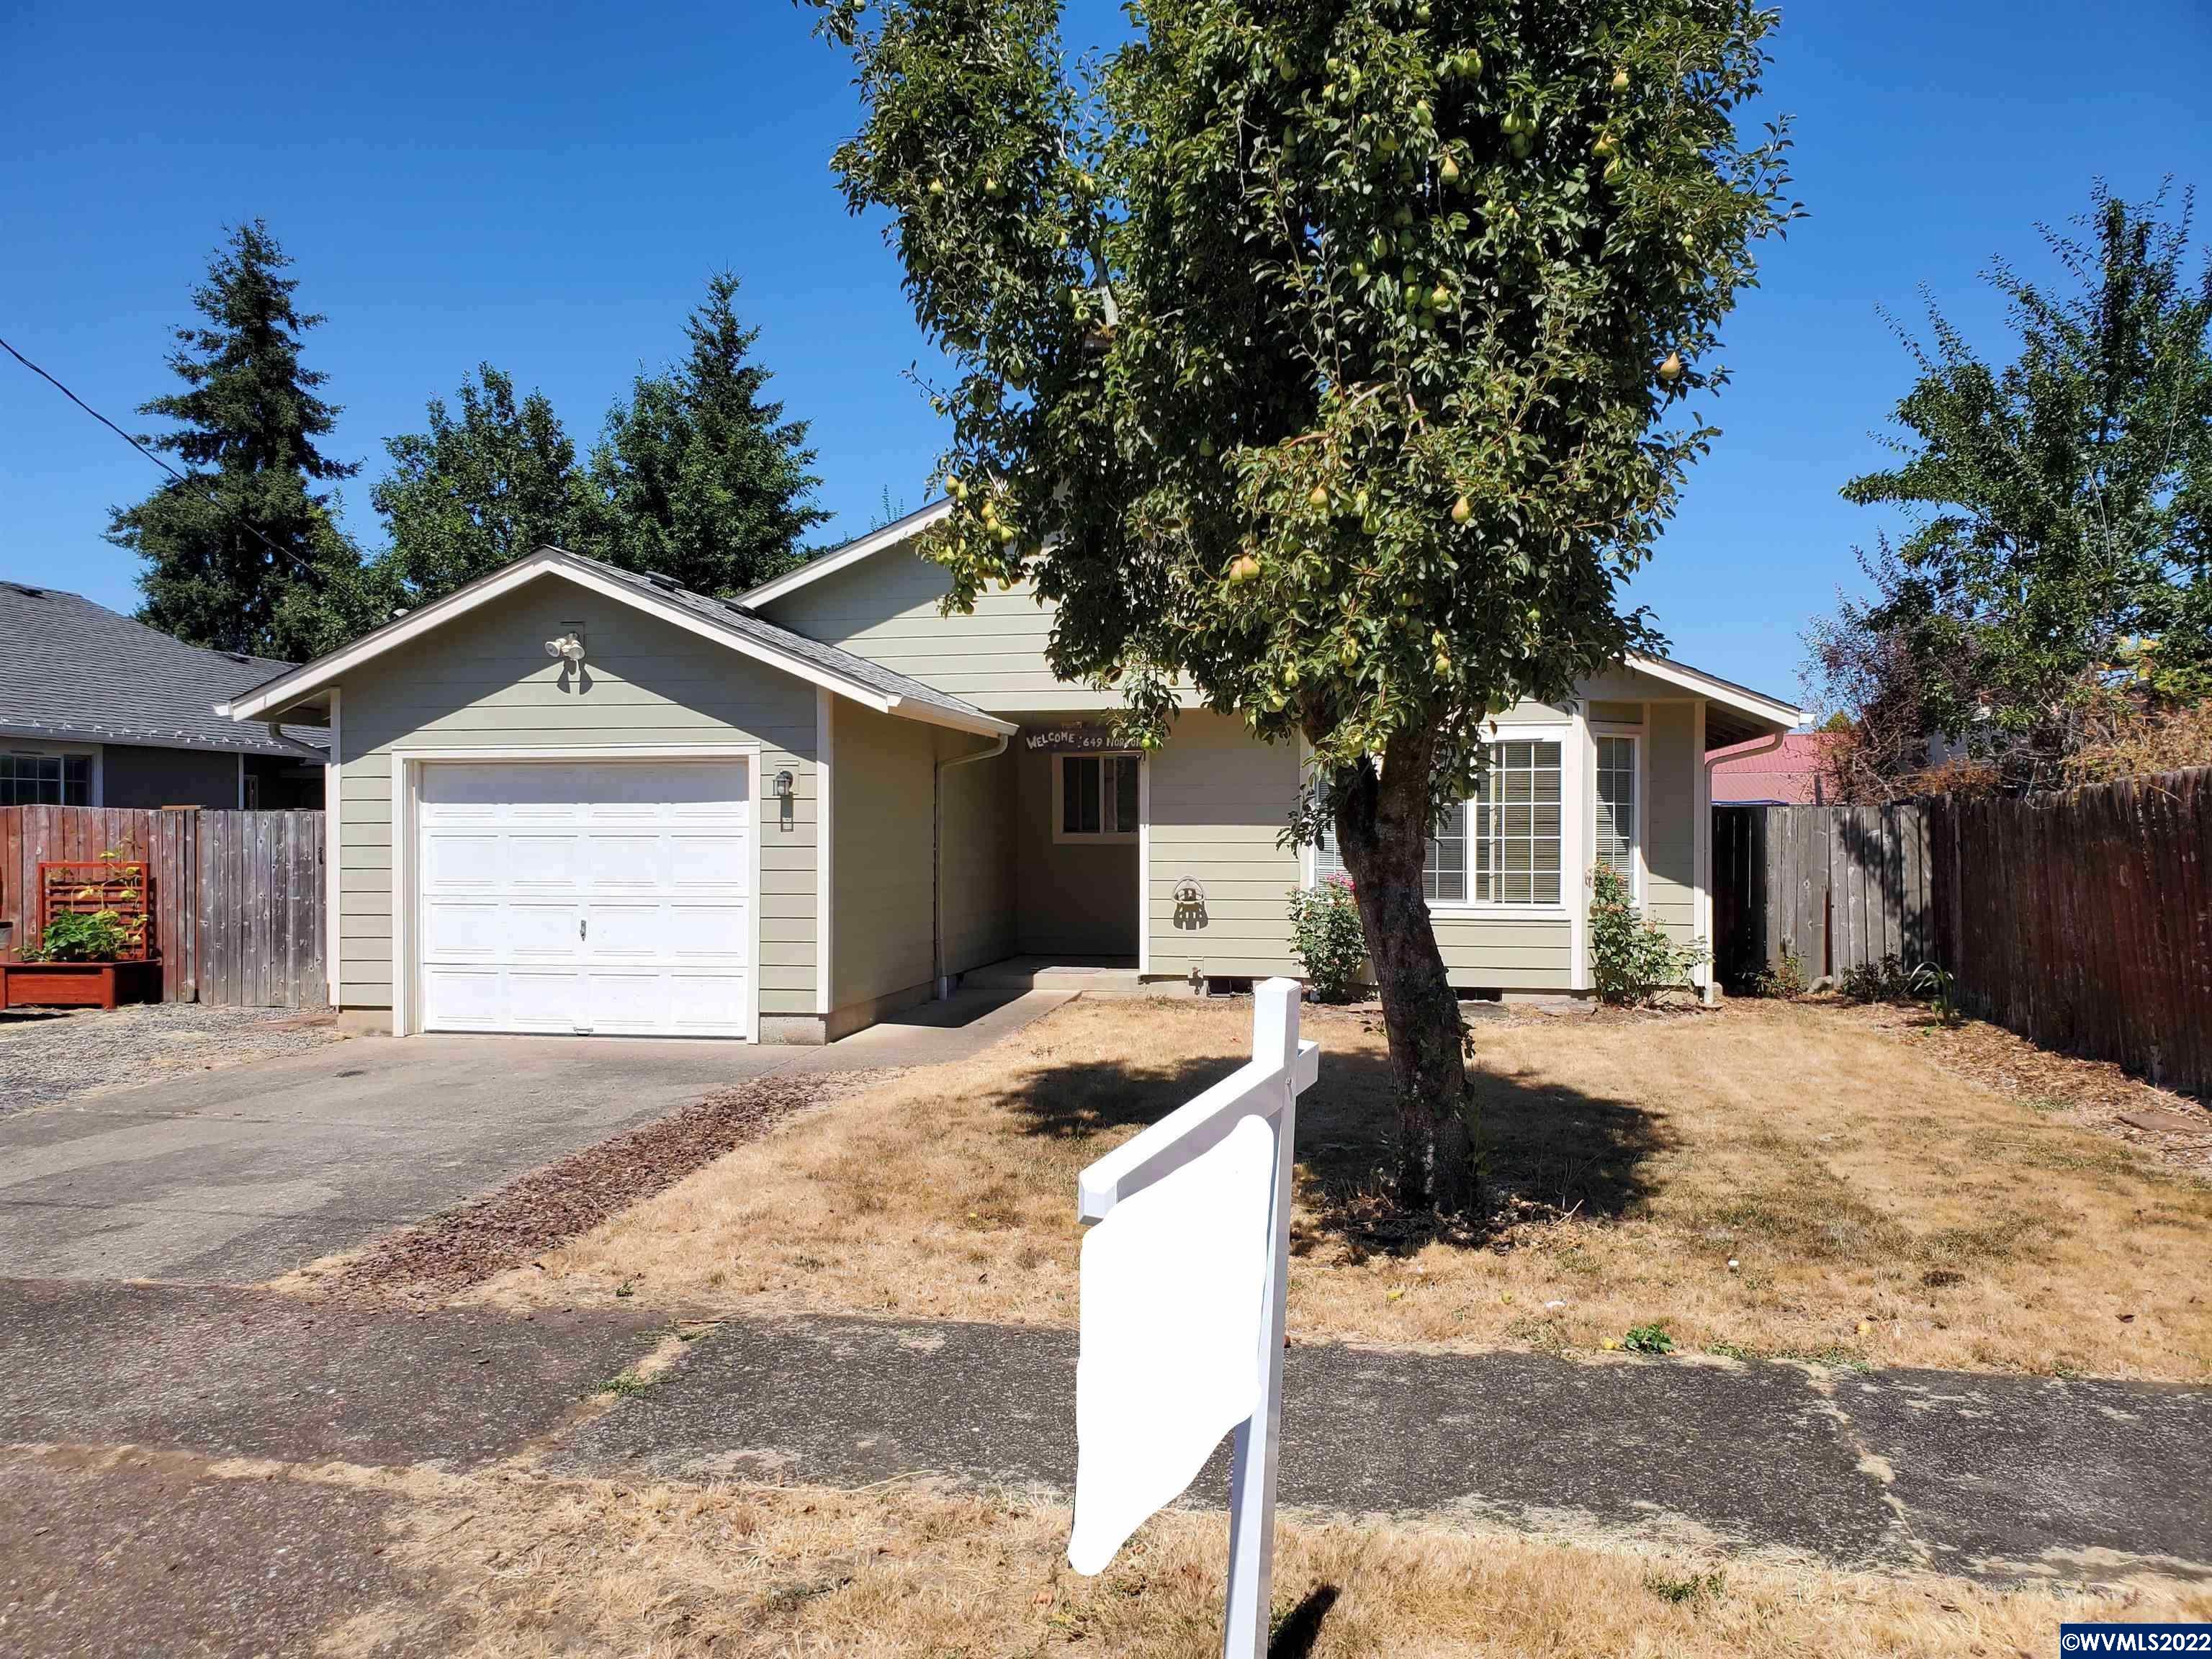 Beautiful updated new light green siding on this single level 3 bed / 2 bath home! Roof is less than 5 yr old. Large fenced yard for entertaining or gardening; juicy pear tree out front. Solid wood kitchen cabinets. Built in 1993, double paned windows. Storage garage has 200 AMP panel. Immediate occupancy available. Bike/walk to Century Park, medical, downtown shopping/dining, Western University, library and easy Hwy 34 commute to Corvallis.